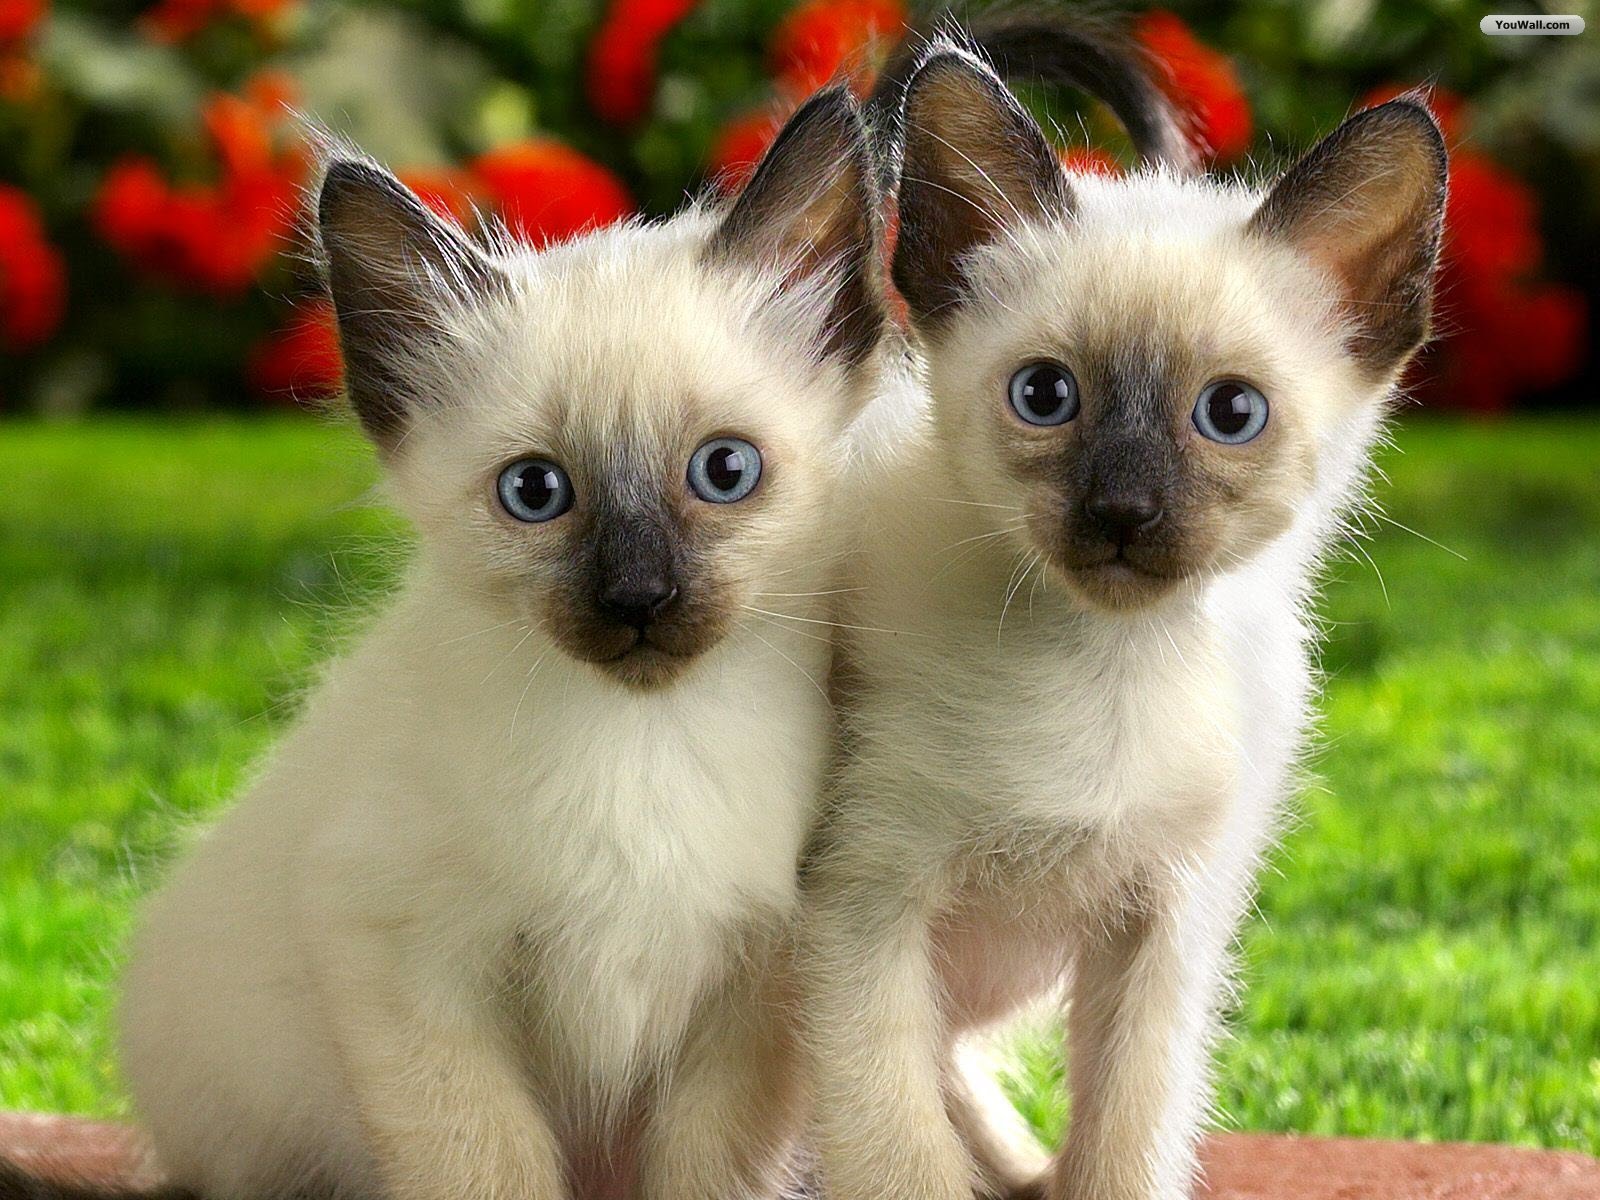 Cute Cat couple HD Wallpaper - Natural Wallpapers | Latest Fashion